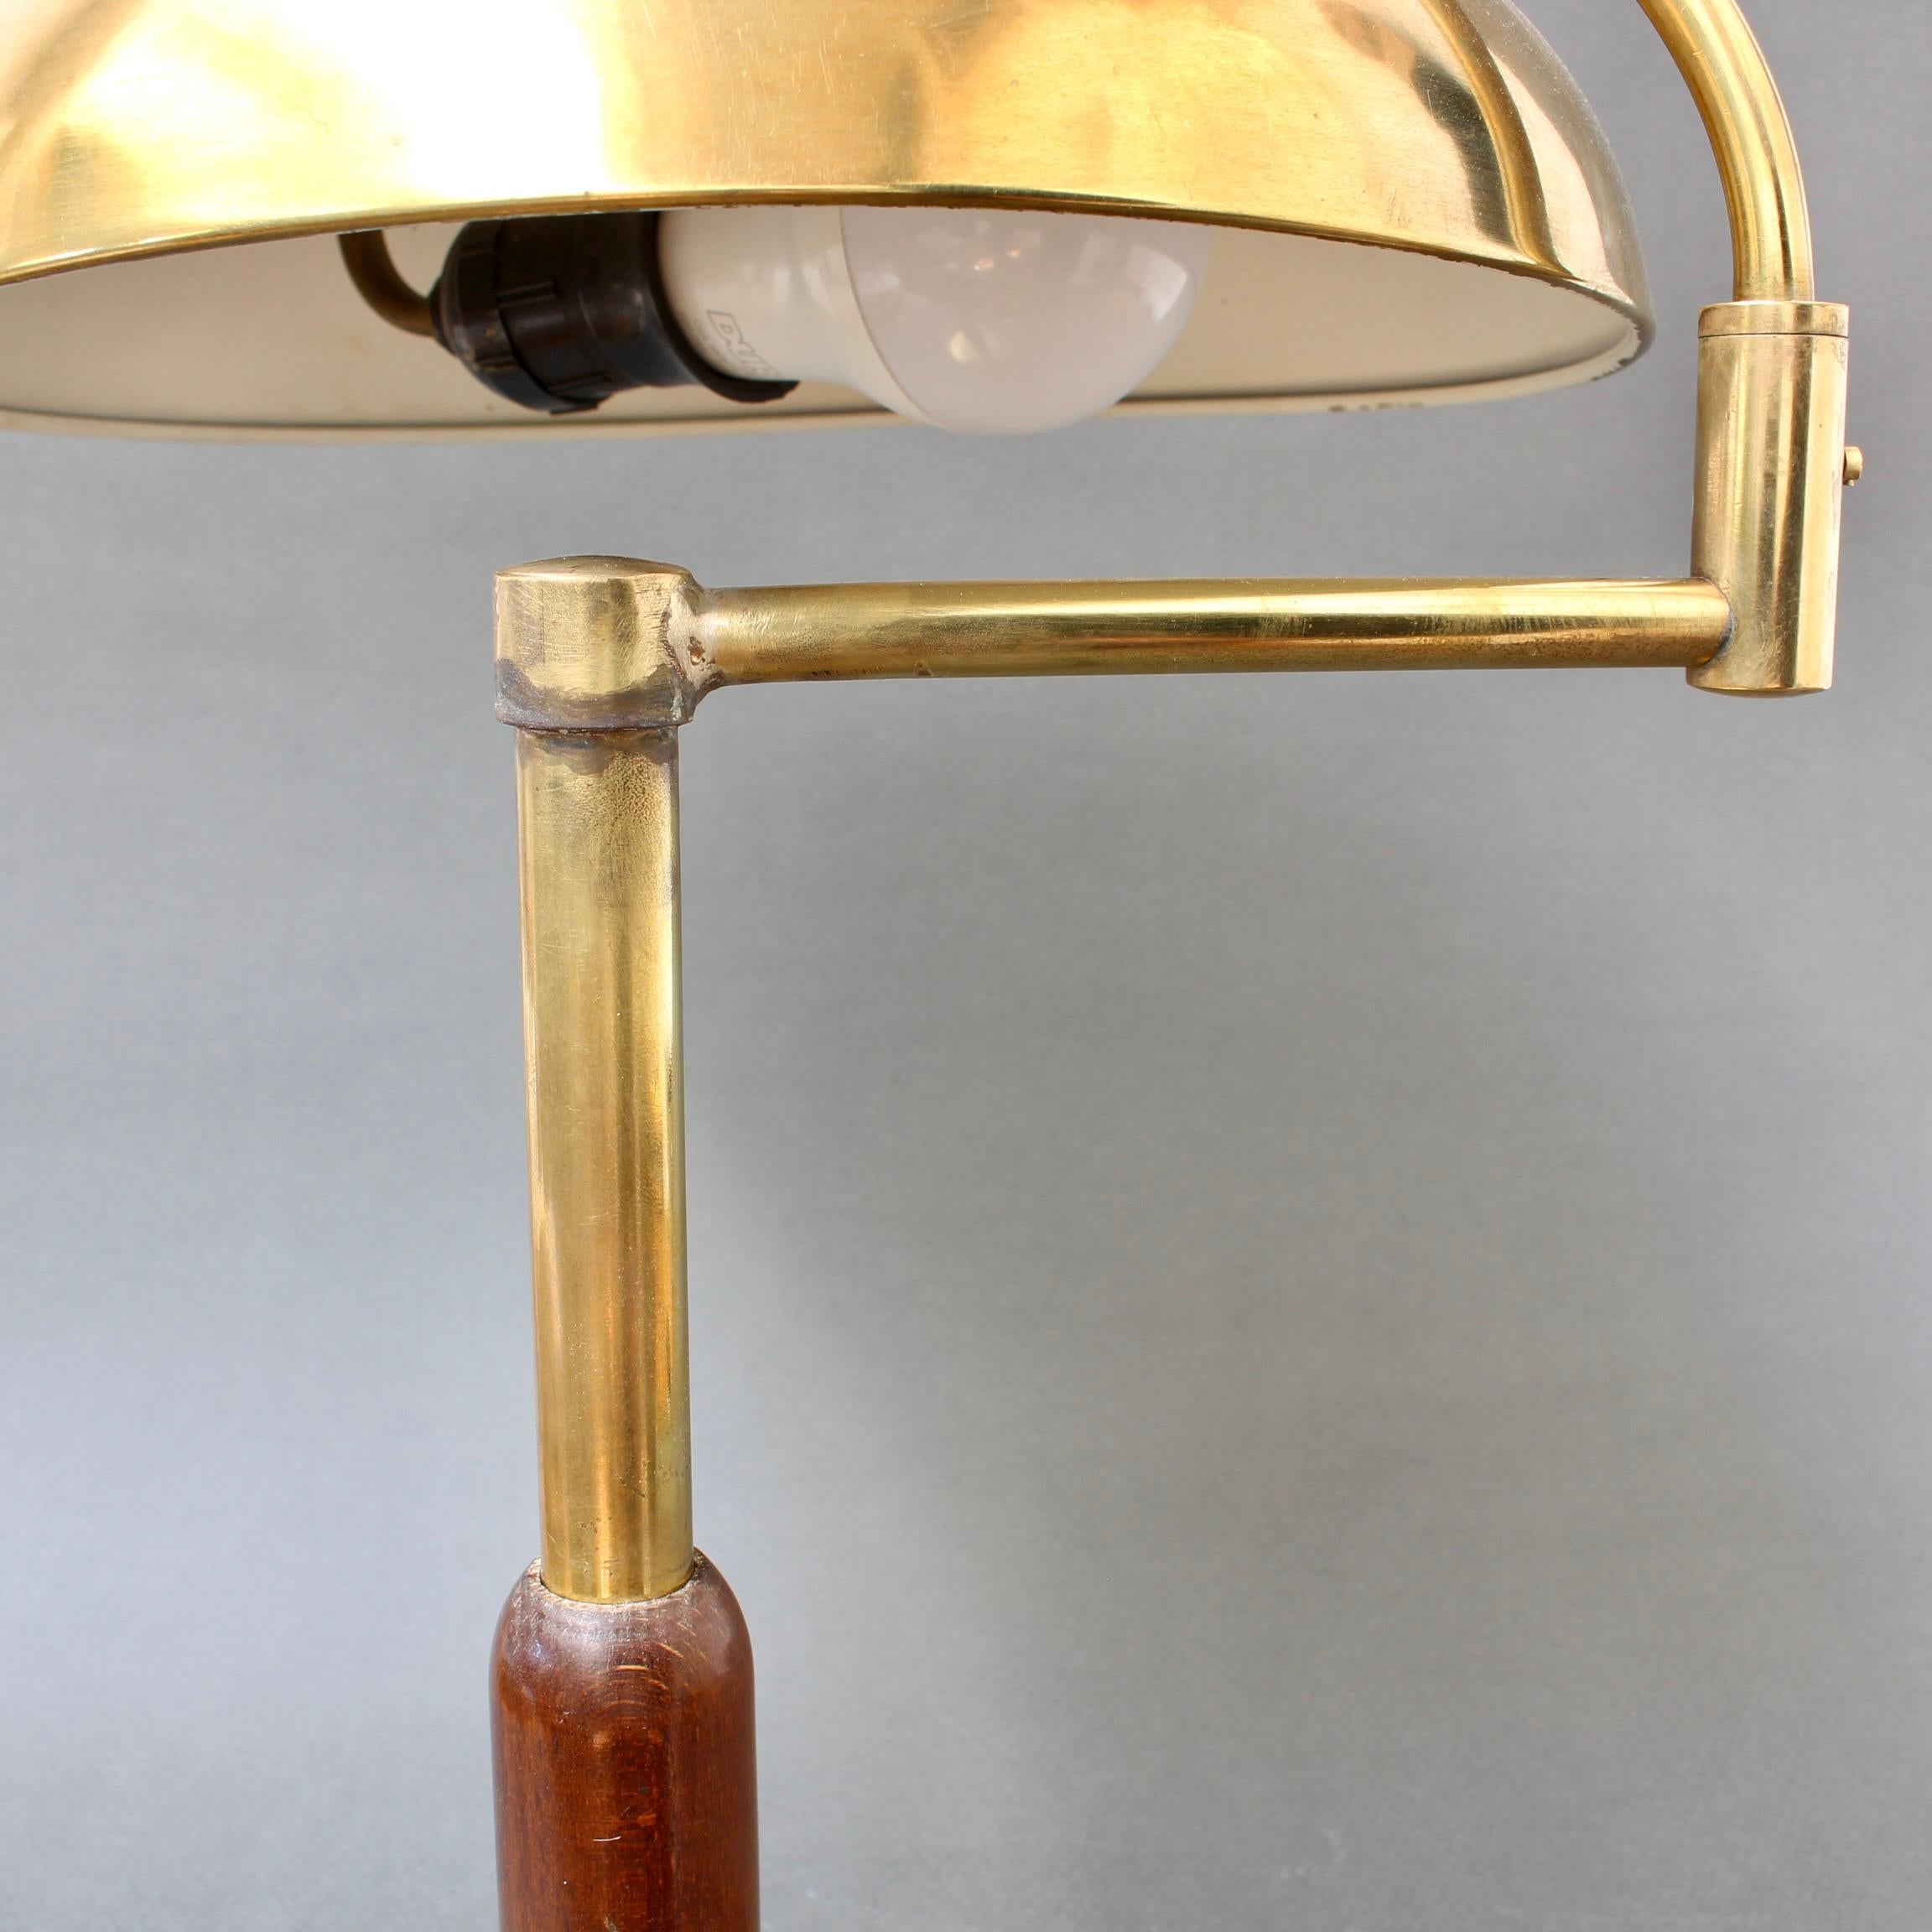 Italian Mid-Century Brass Table Lamp with Swivel Arm, circa 1950s For Sale 3